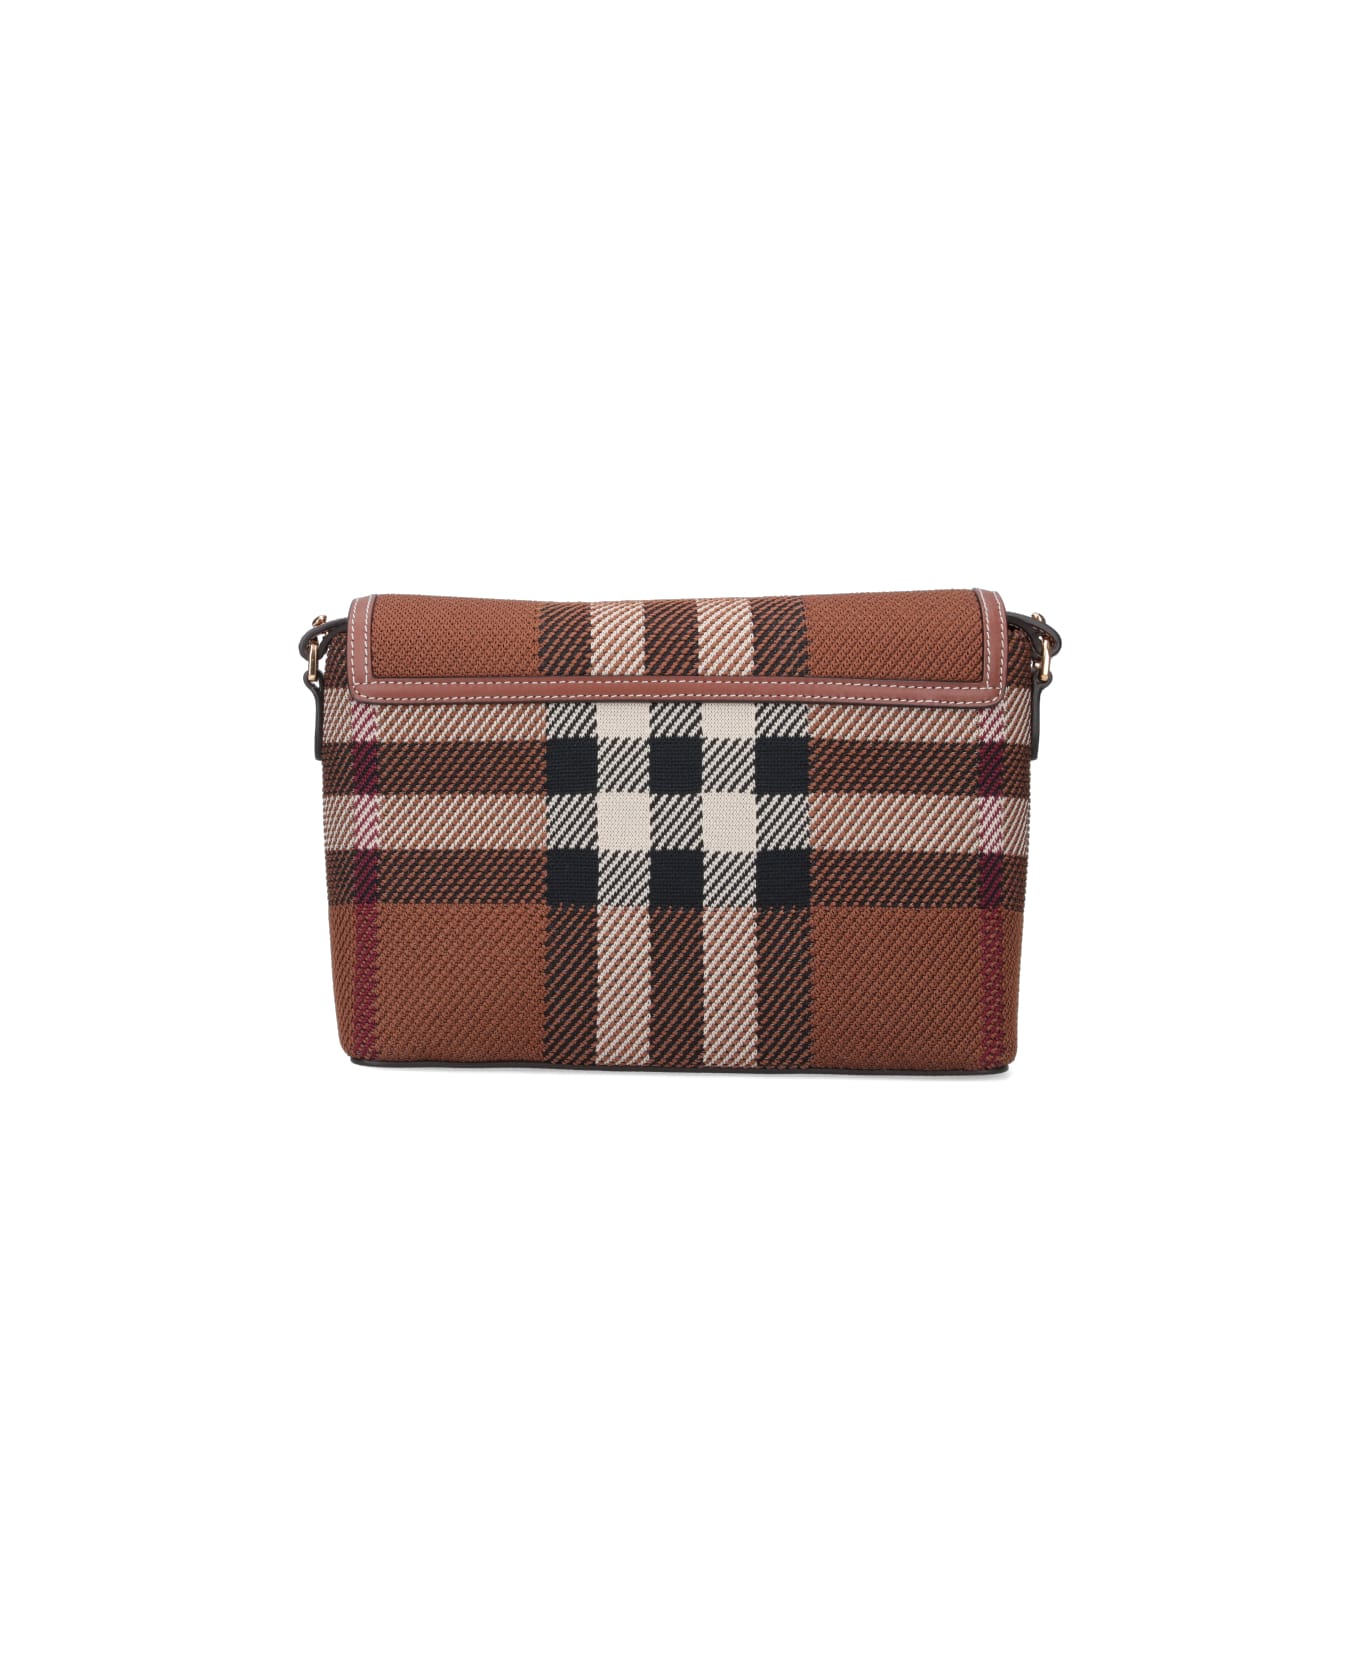 Burberry Tartan Knitted 'note' Bag - Brown